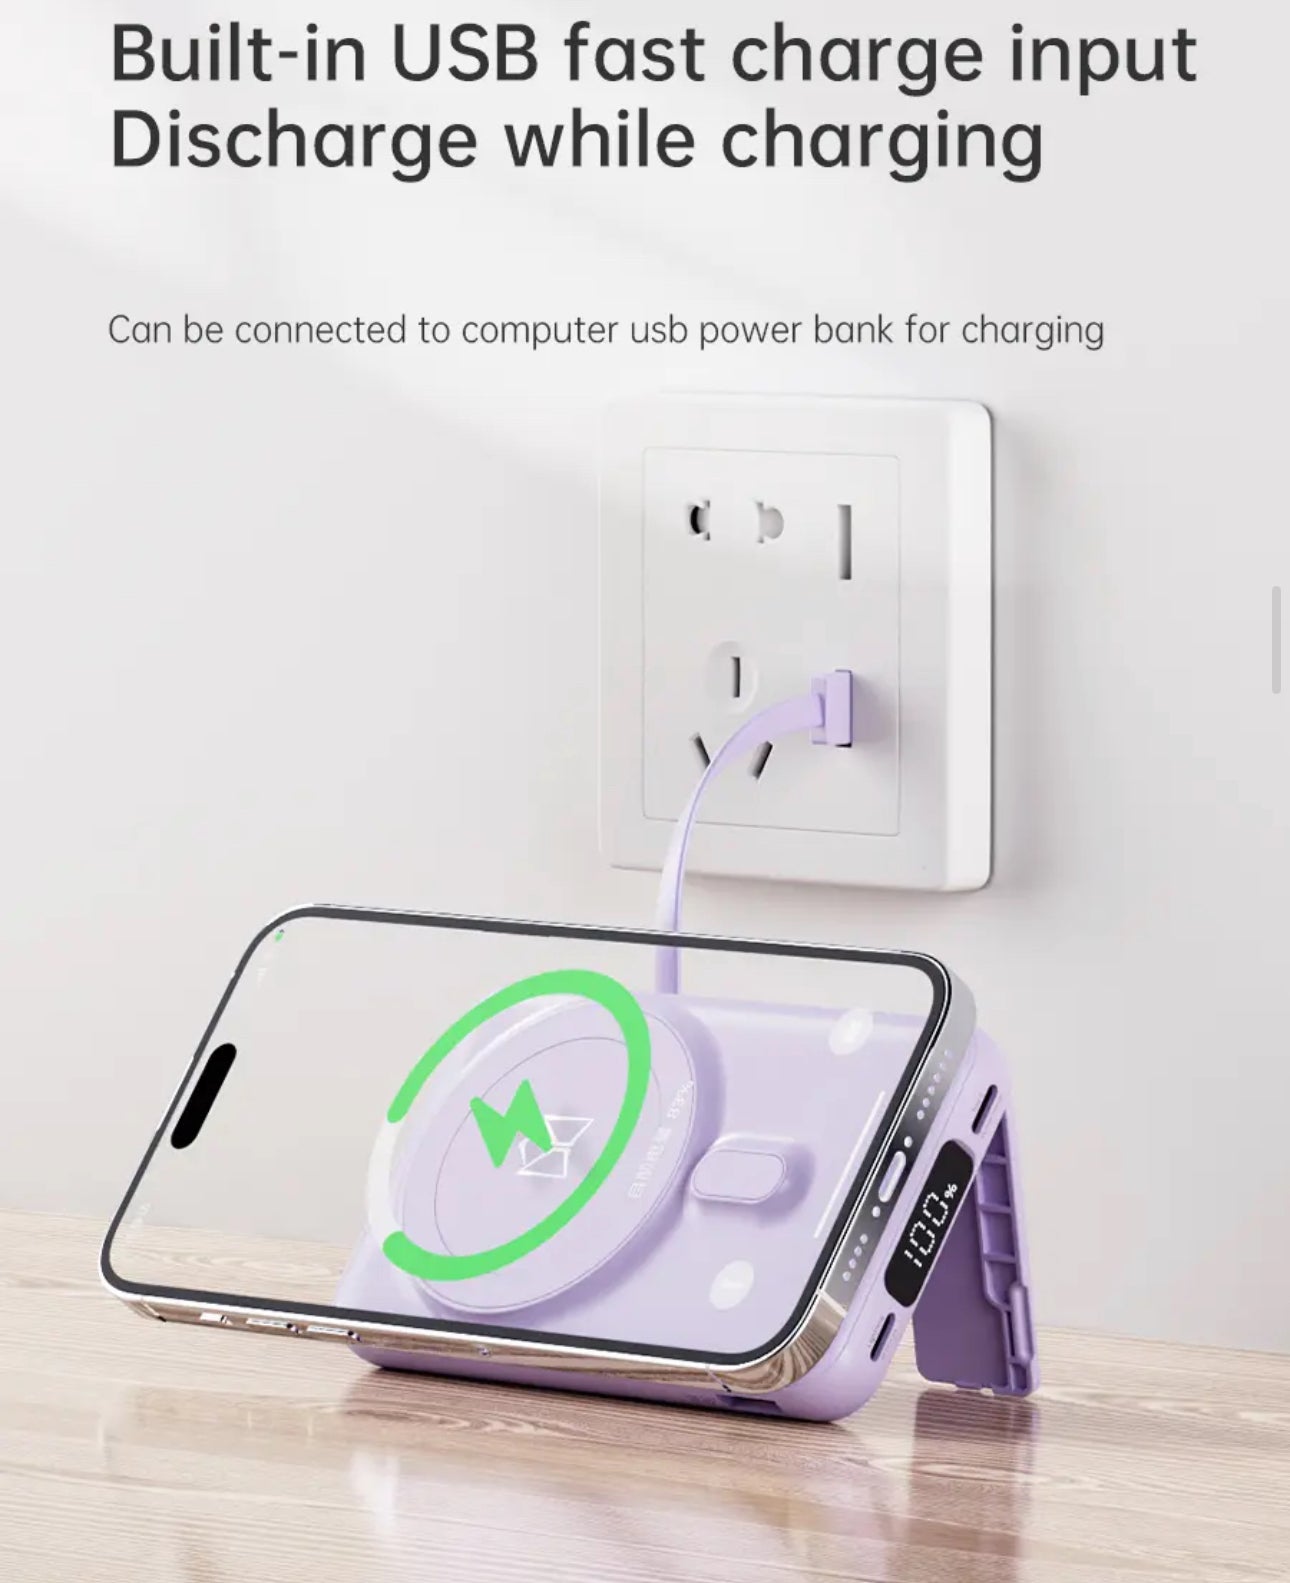 ISP X1 10000mah Portable powerbank with PD fast charging with built in wires-with foldable stand magnetic wireless charger mini wireless power bank type c charging